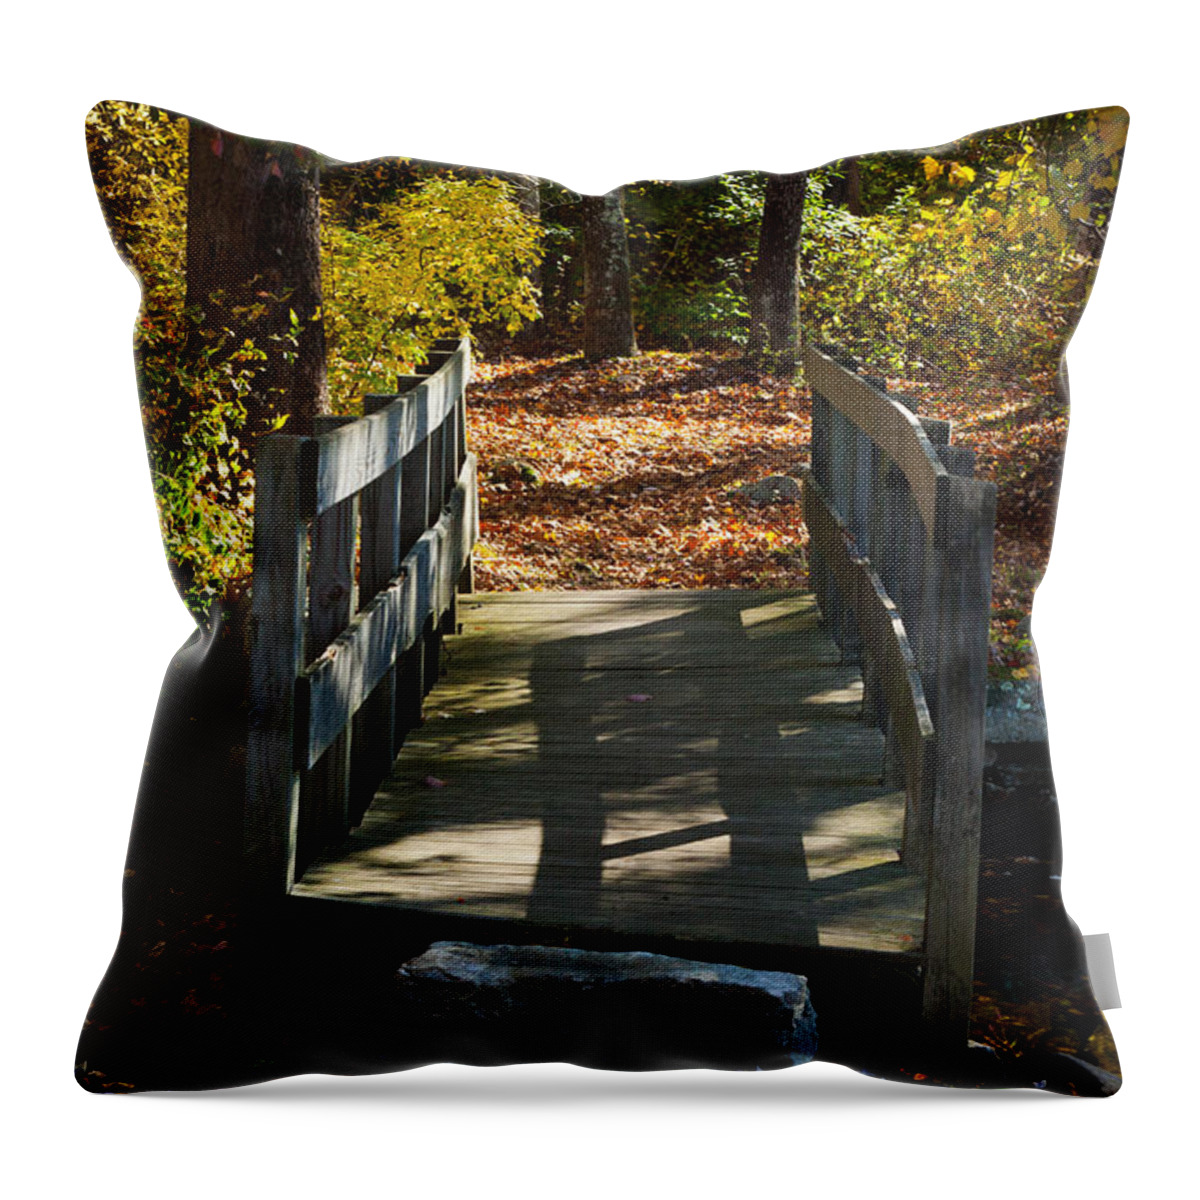 Sawmill Throw Pillow featuring the photograph Wooden Bridge - Ledyard Sawmill by Kirkodd Photography Of New England